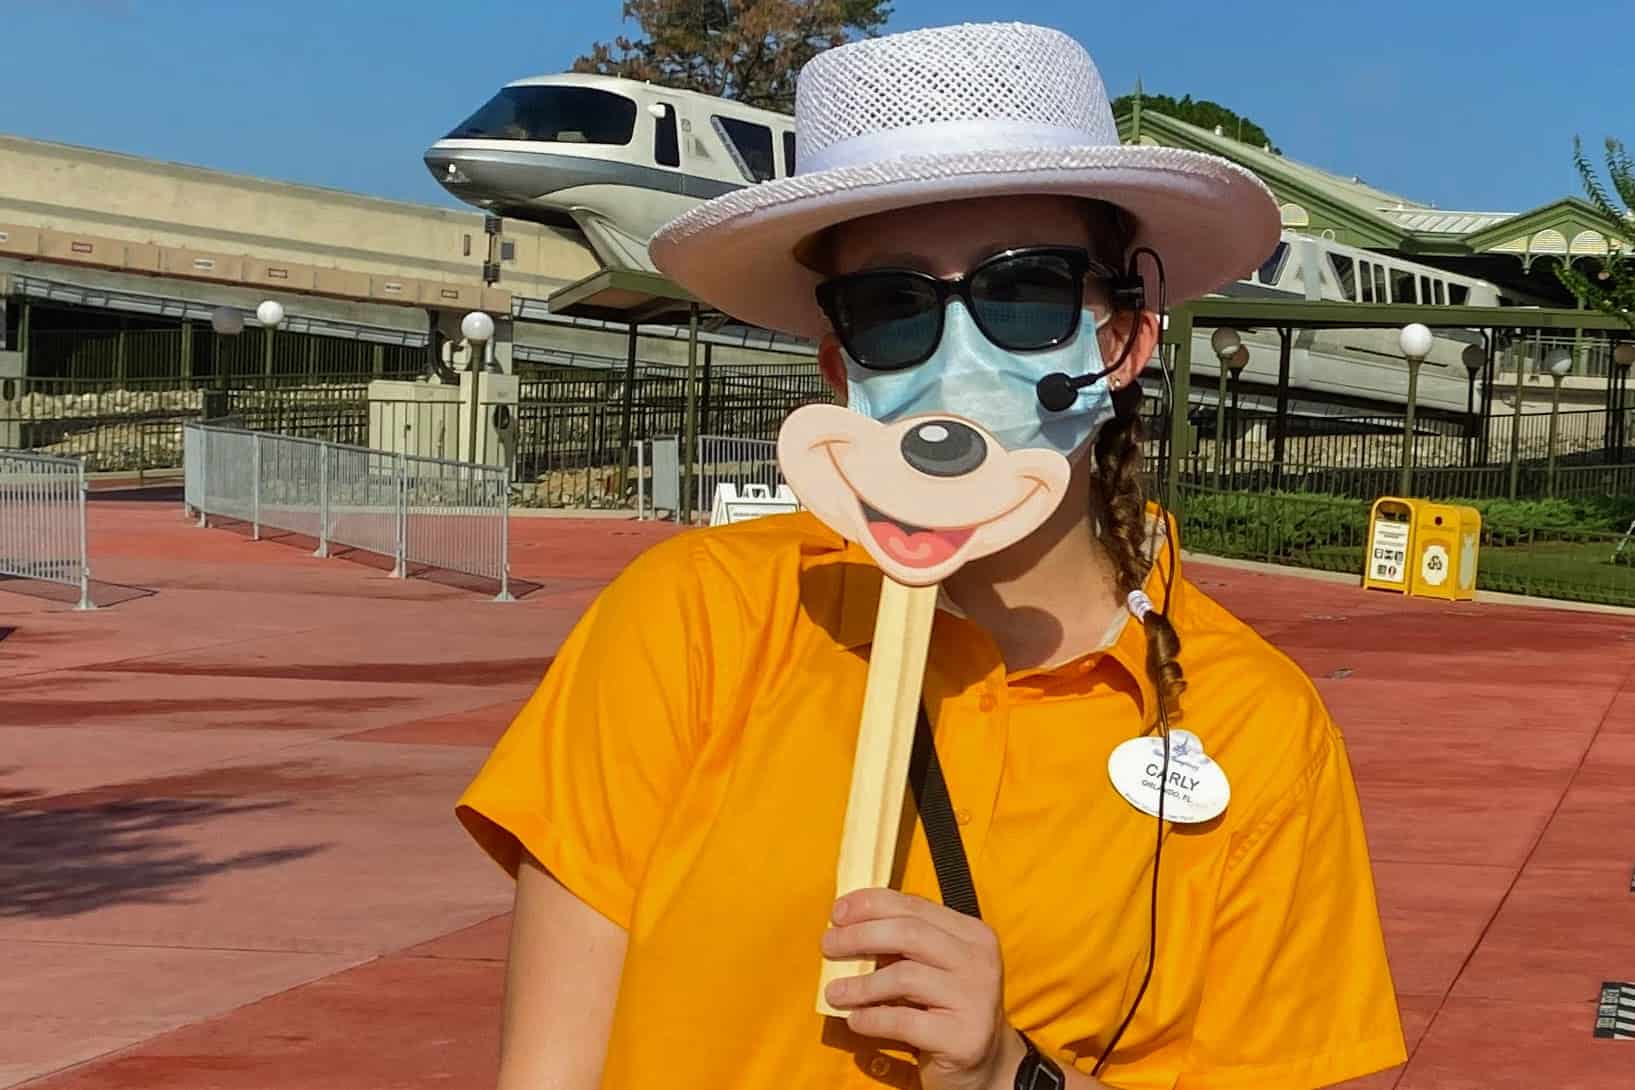 Disney World Is Removing Mask Requirements For Outdoor Rides & More